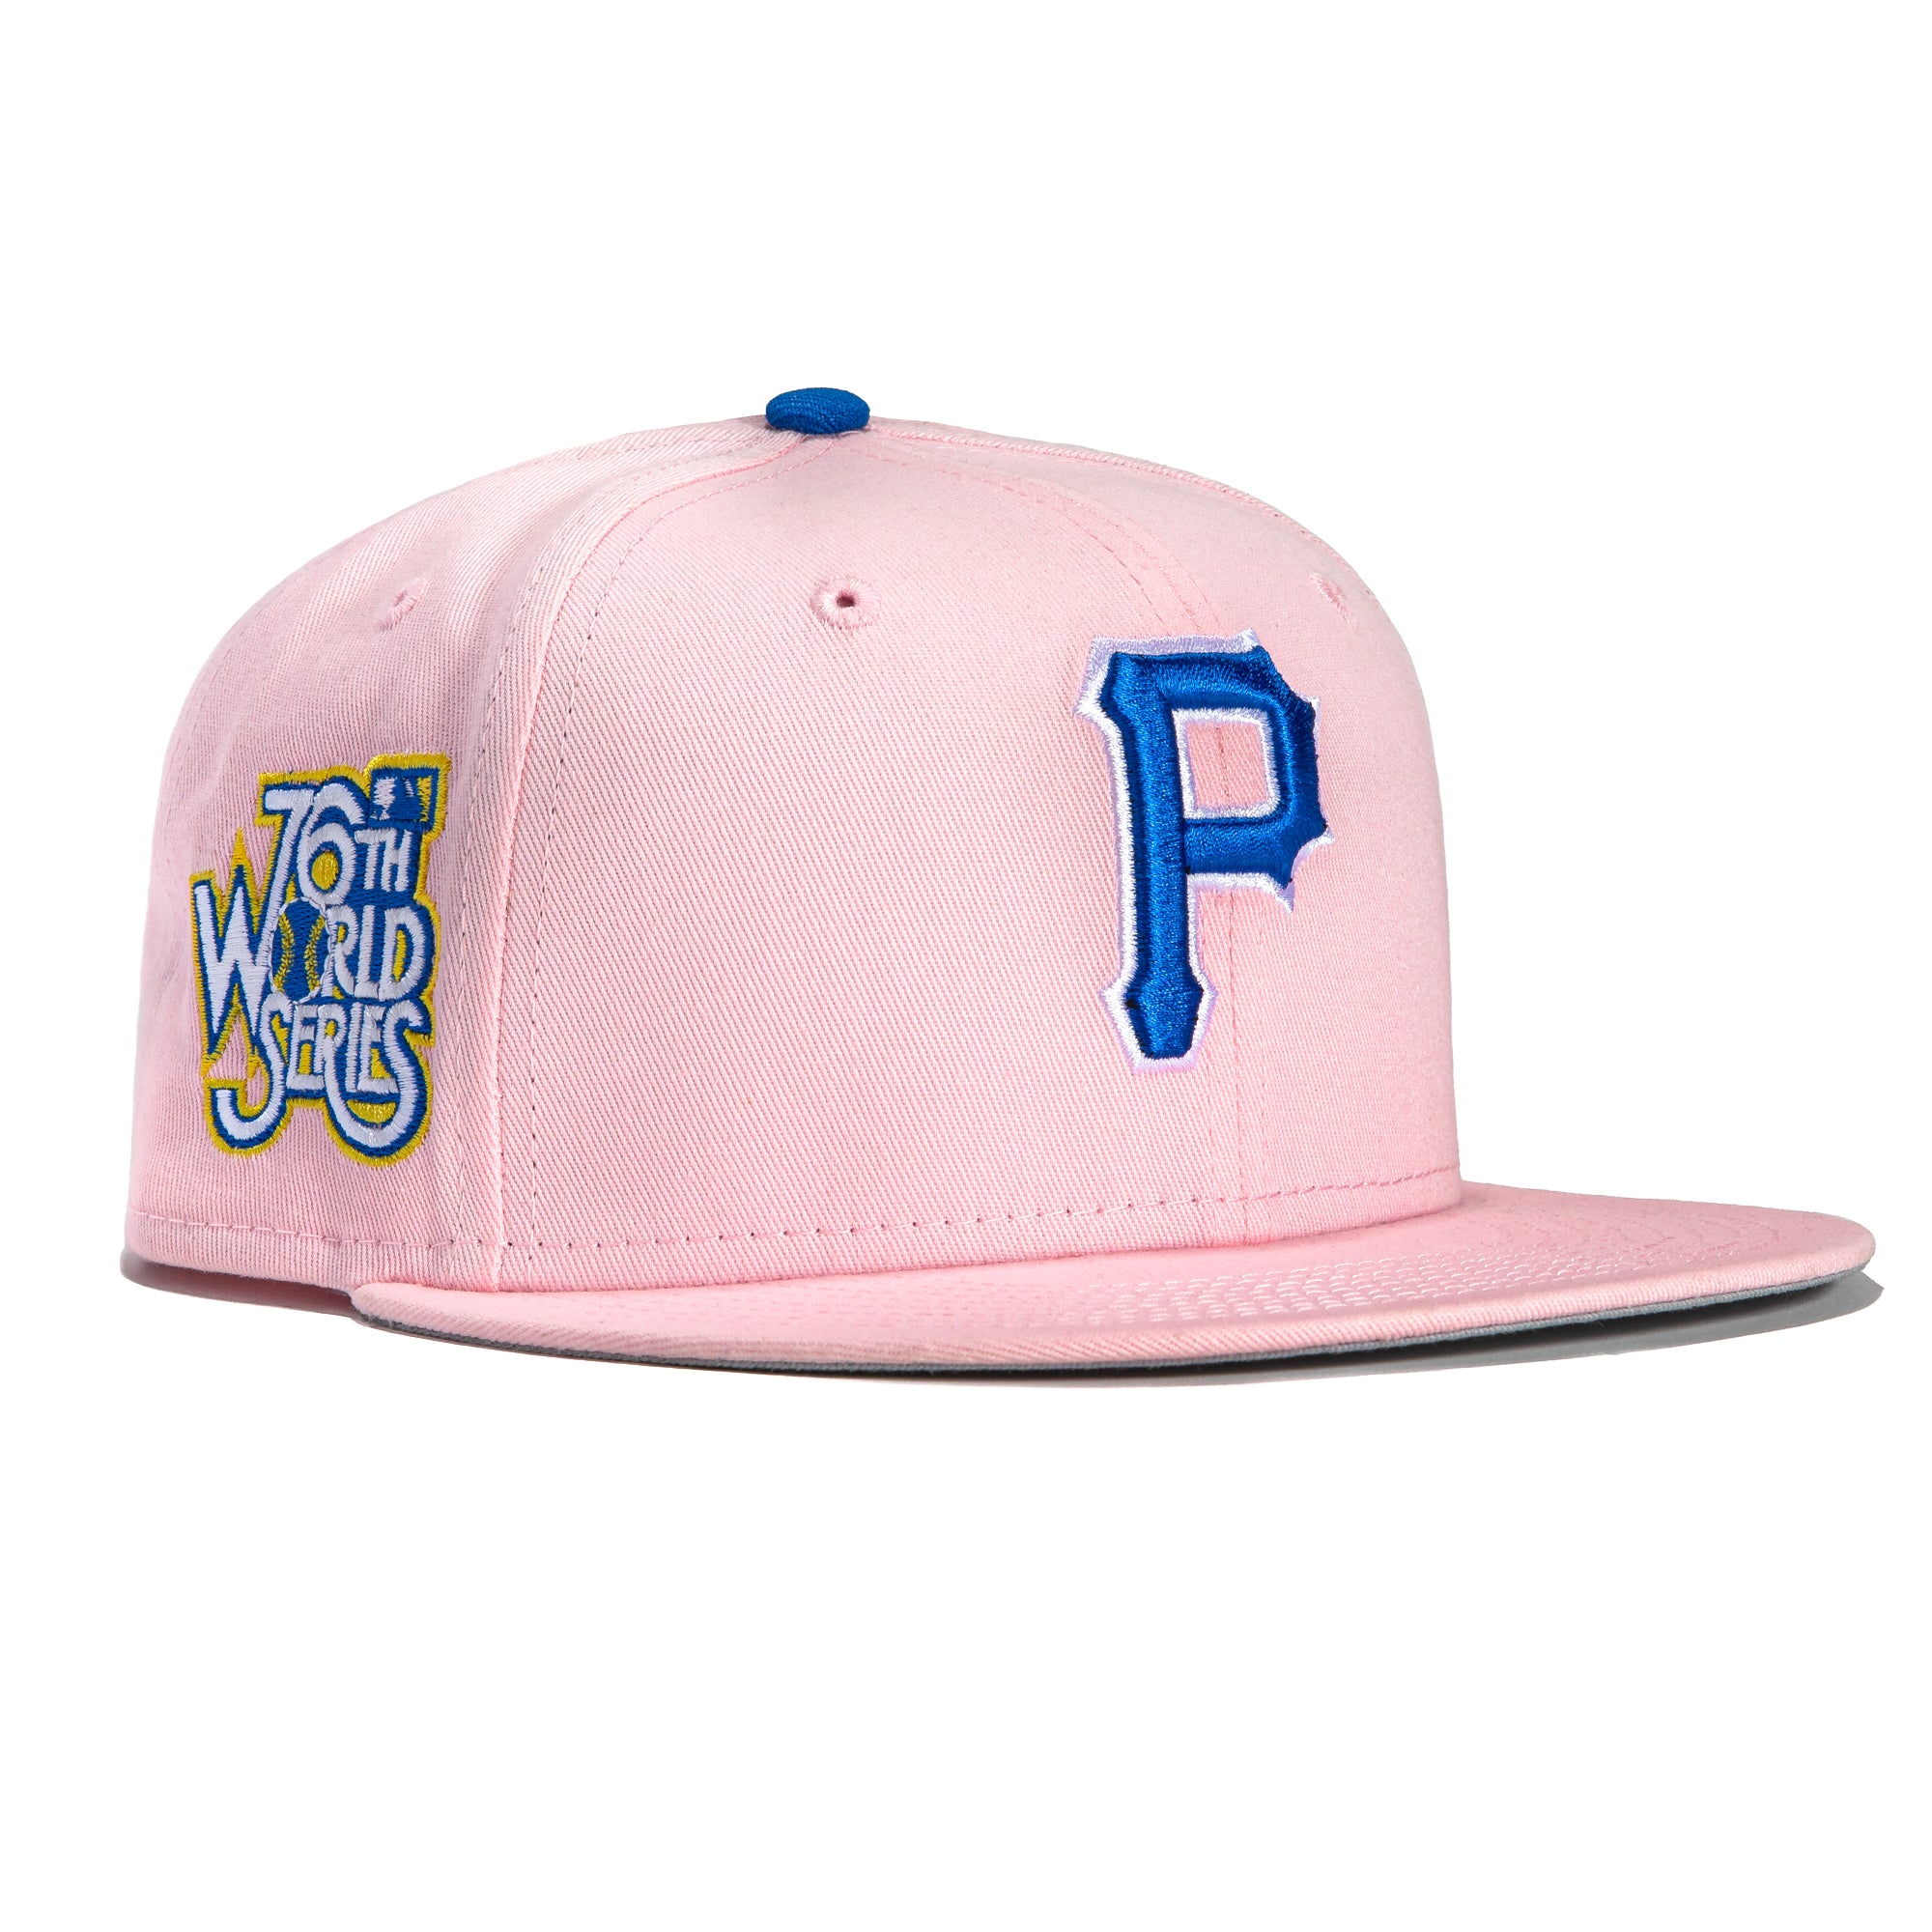 New Era 59Fifty Real Facts Pittsburgh Pirates 1979 World Series